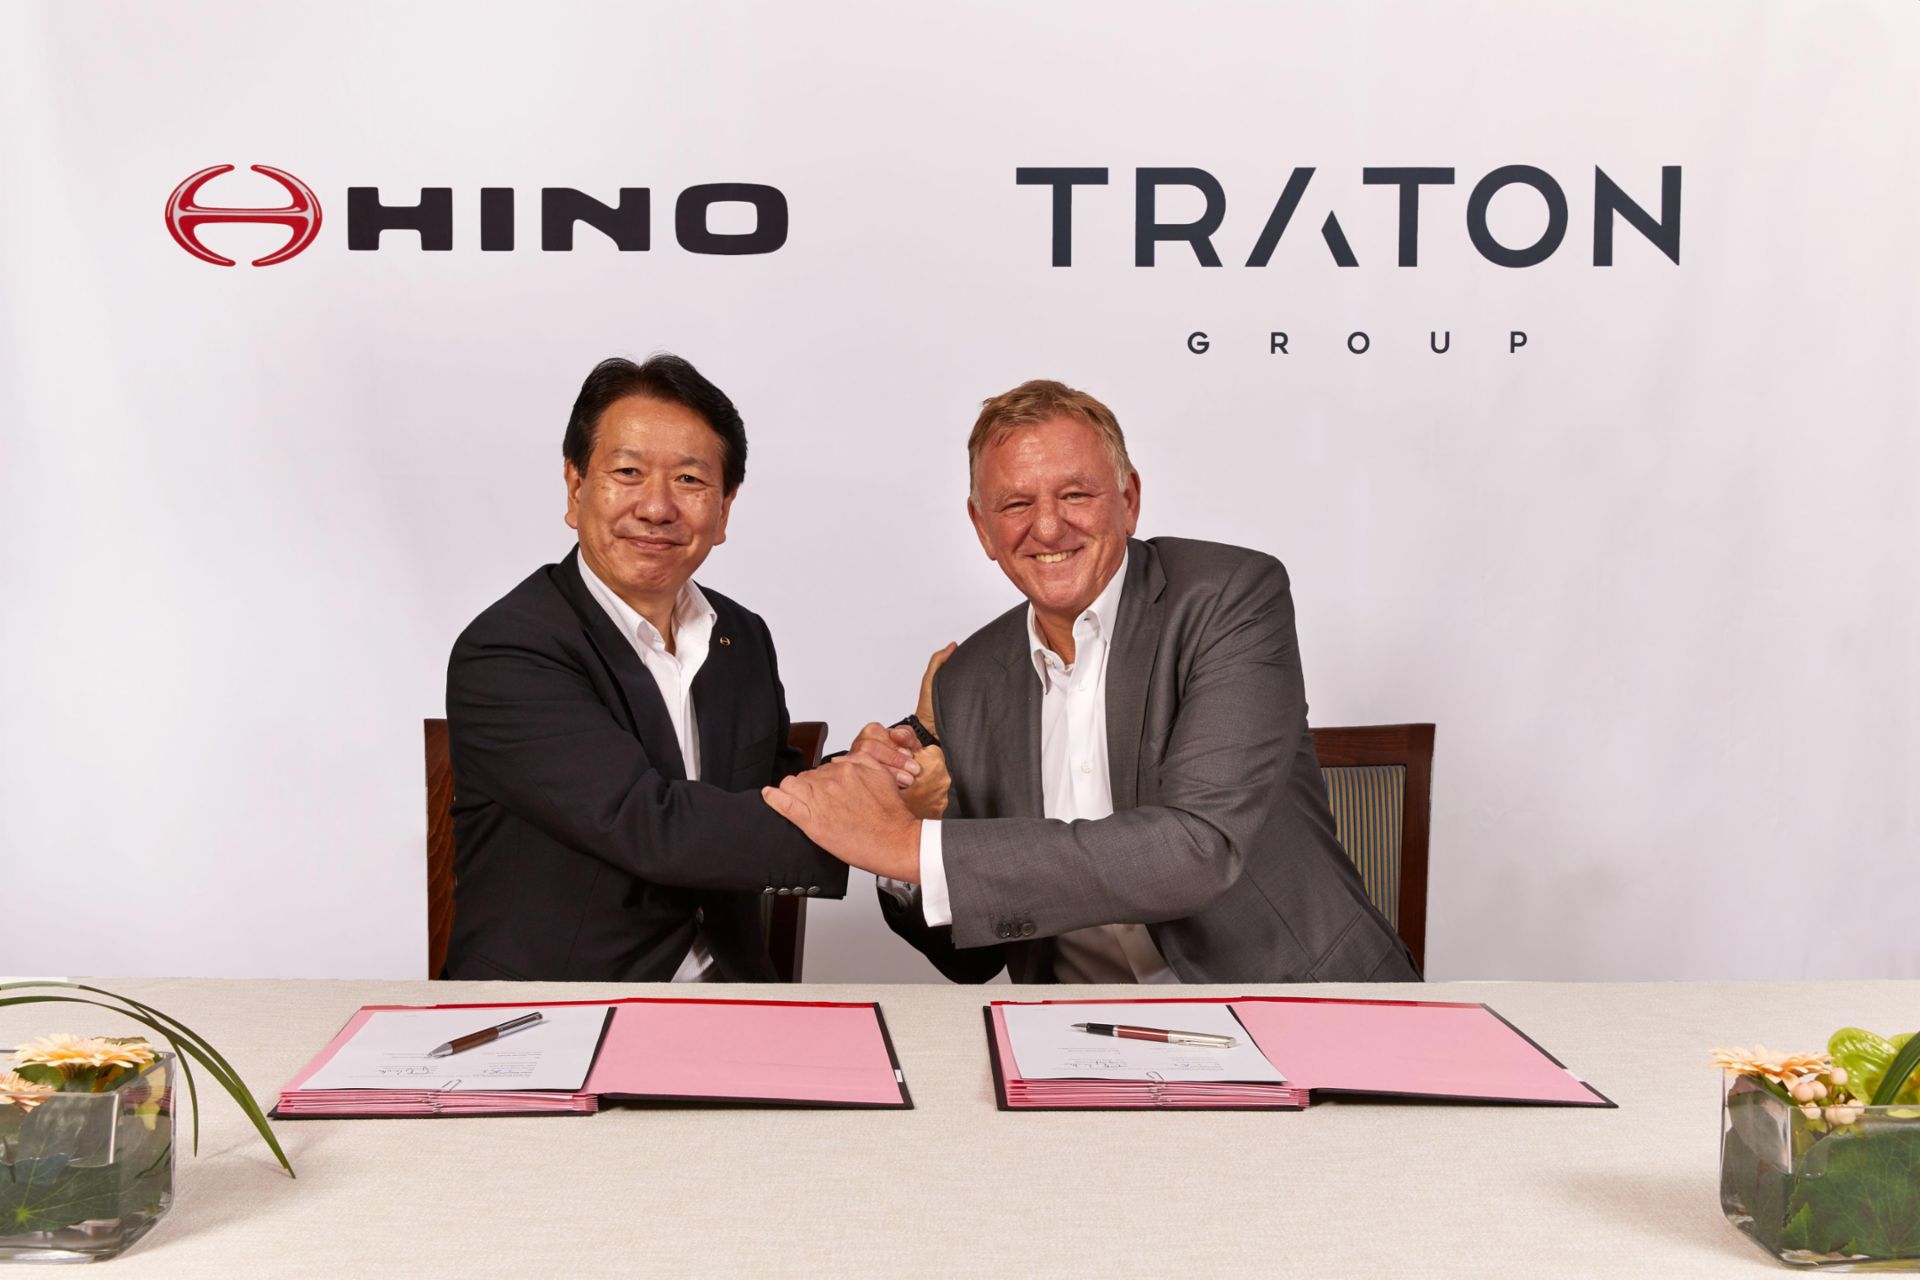 (left) Yoshio Shimo, President & CEO of Hino Motors, Ltd.
(right) Andreas Renschler, CEO of TRATON AG and member of the Board of Management of Volkswagen AG responsible for Commercial Vehicles